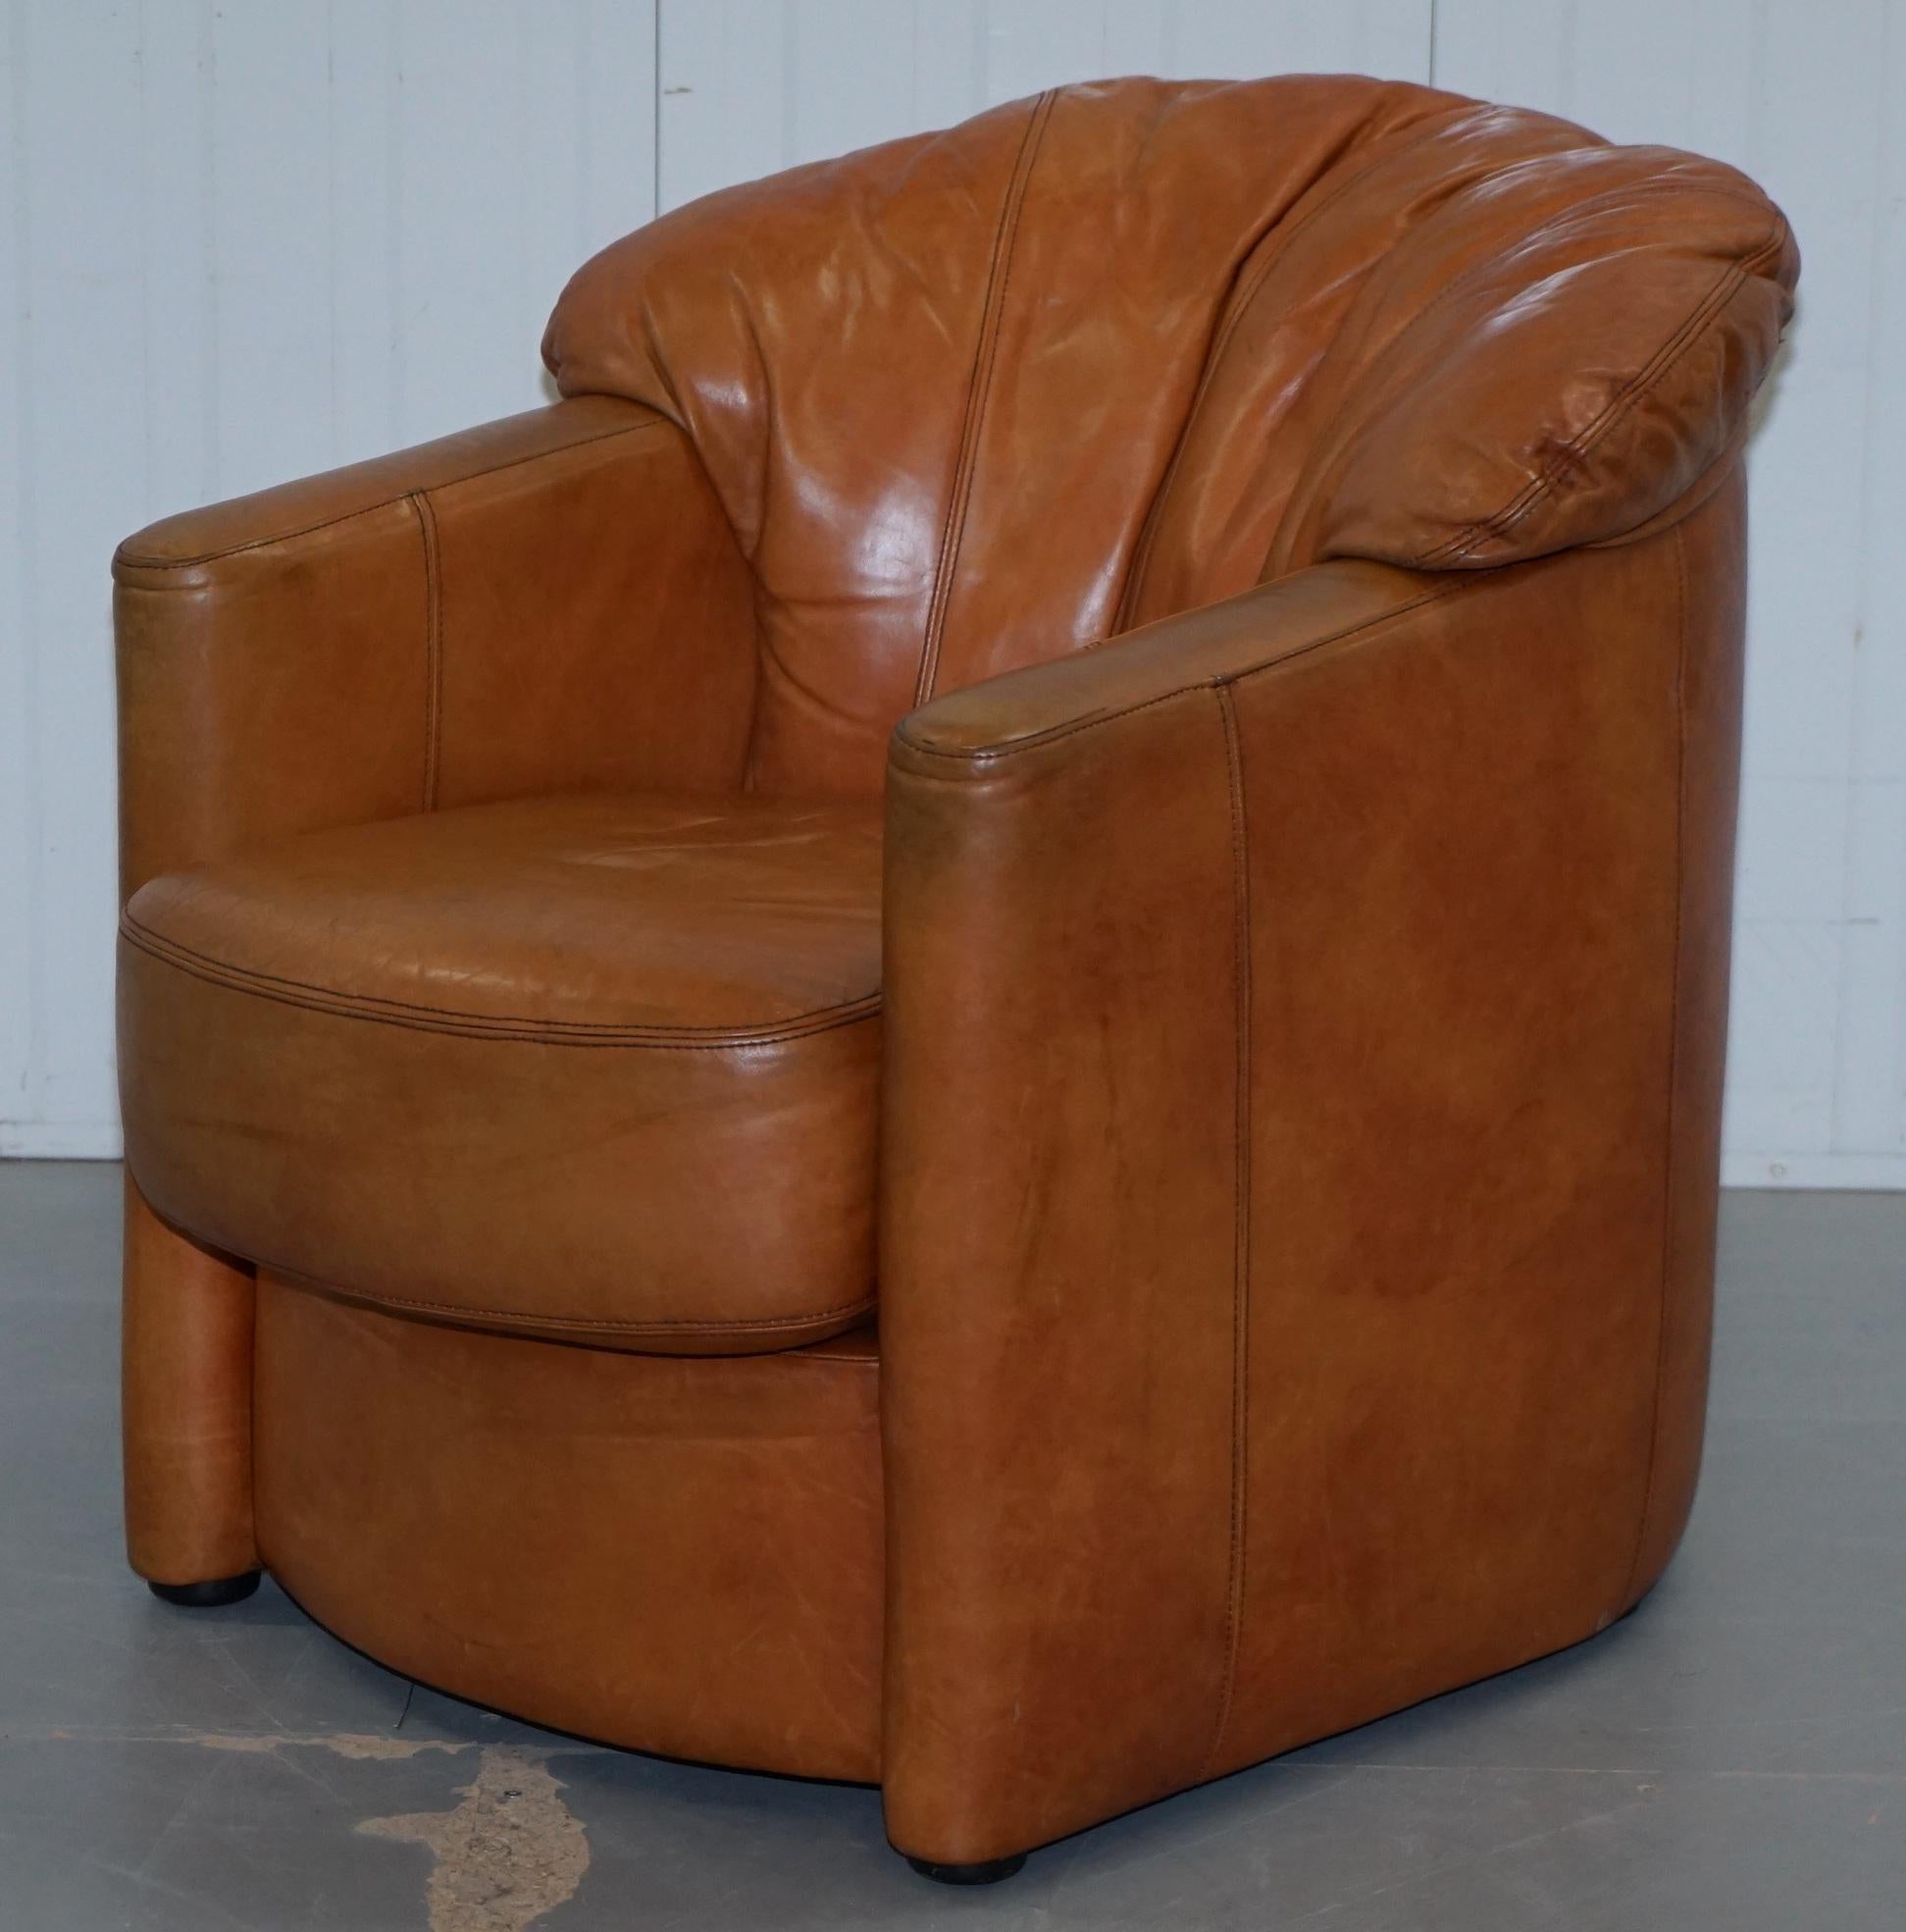 aged tan leather